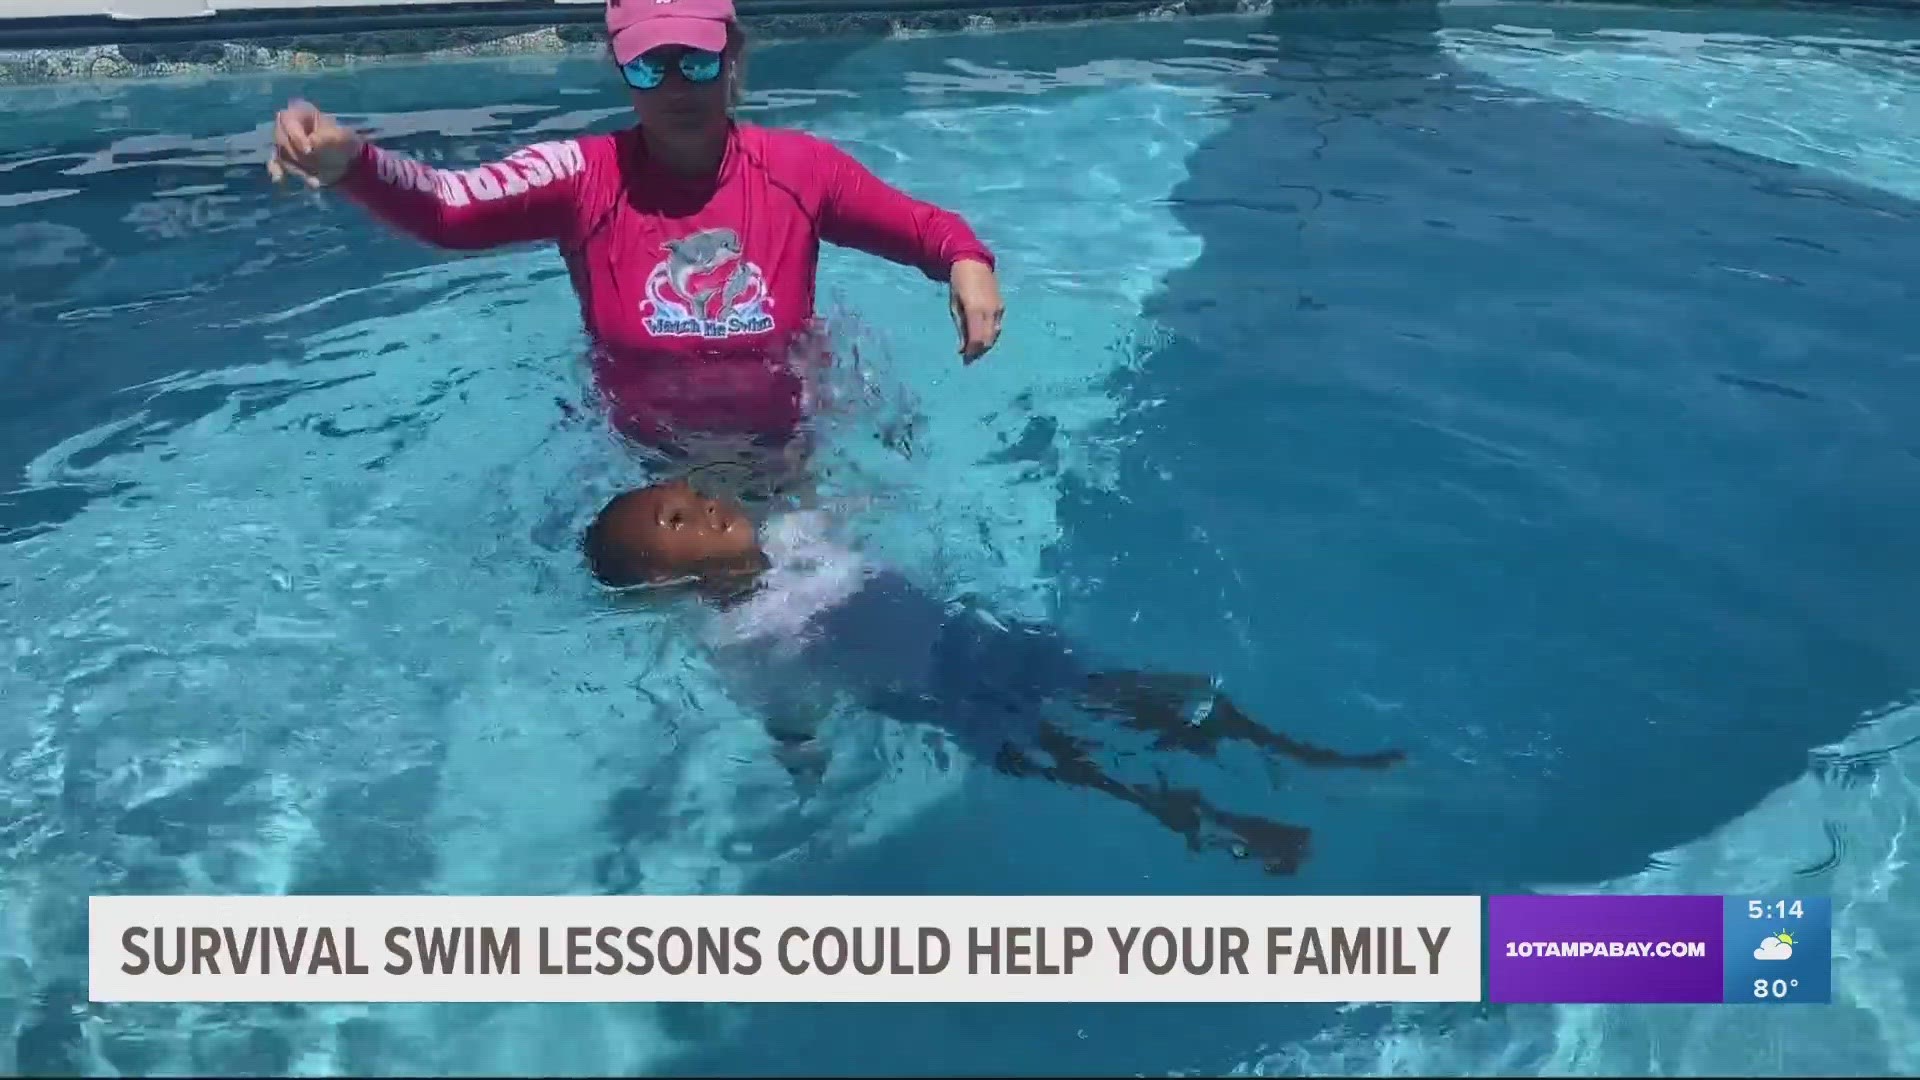 From 2018 to 2020 combined, Florida was ranked the highest in the U.S. for unintentional drowning death rate among children ages 1 to 4 years.